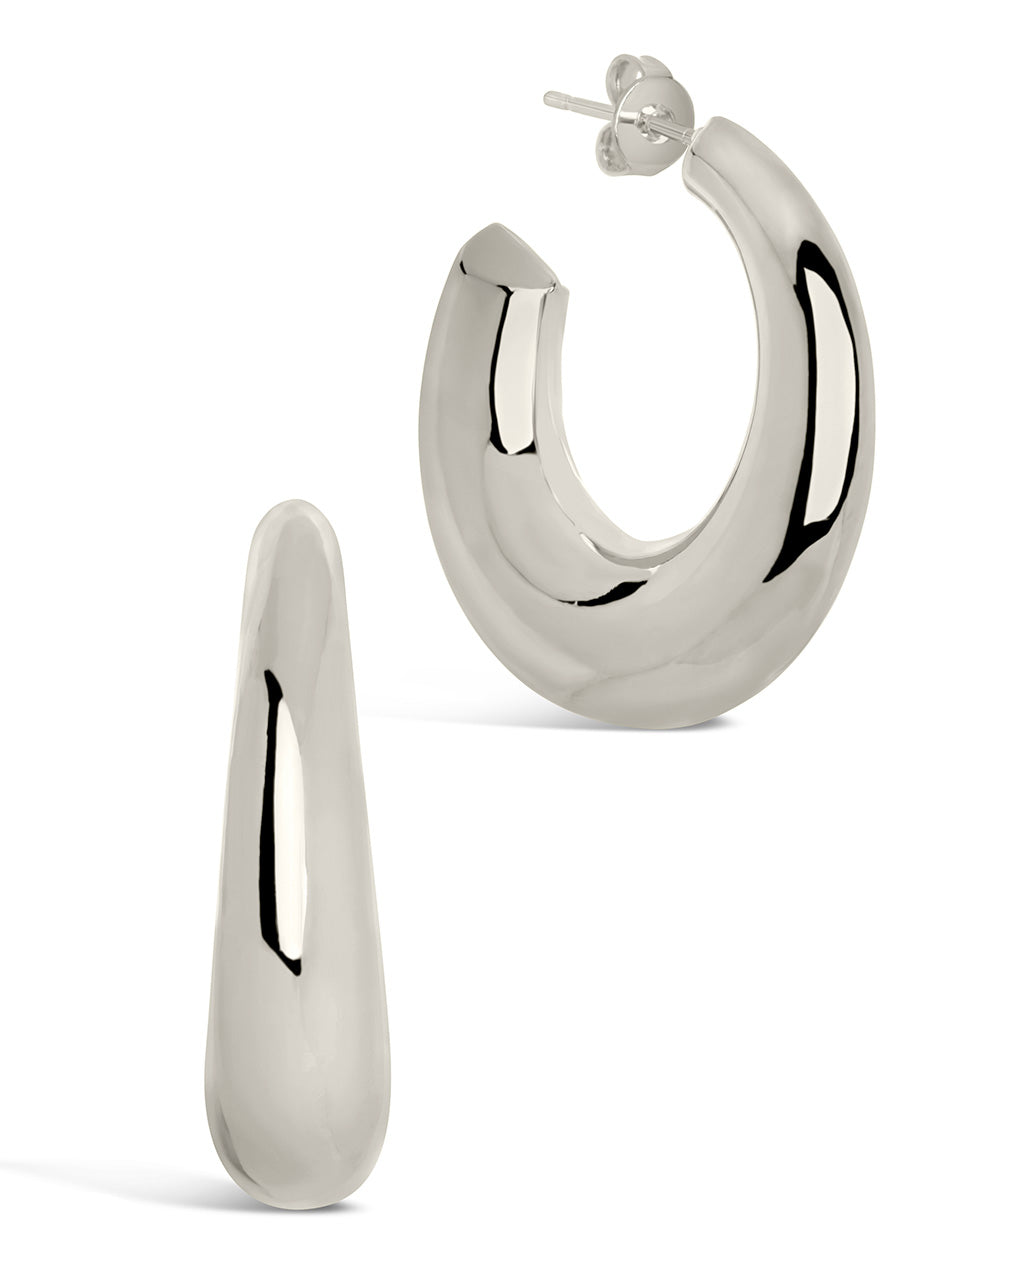 Thick Chunky Hoops, Small Bold Hoop Earrings, Statement Silver Hoops